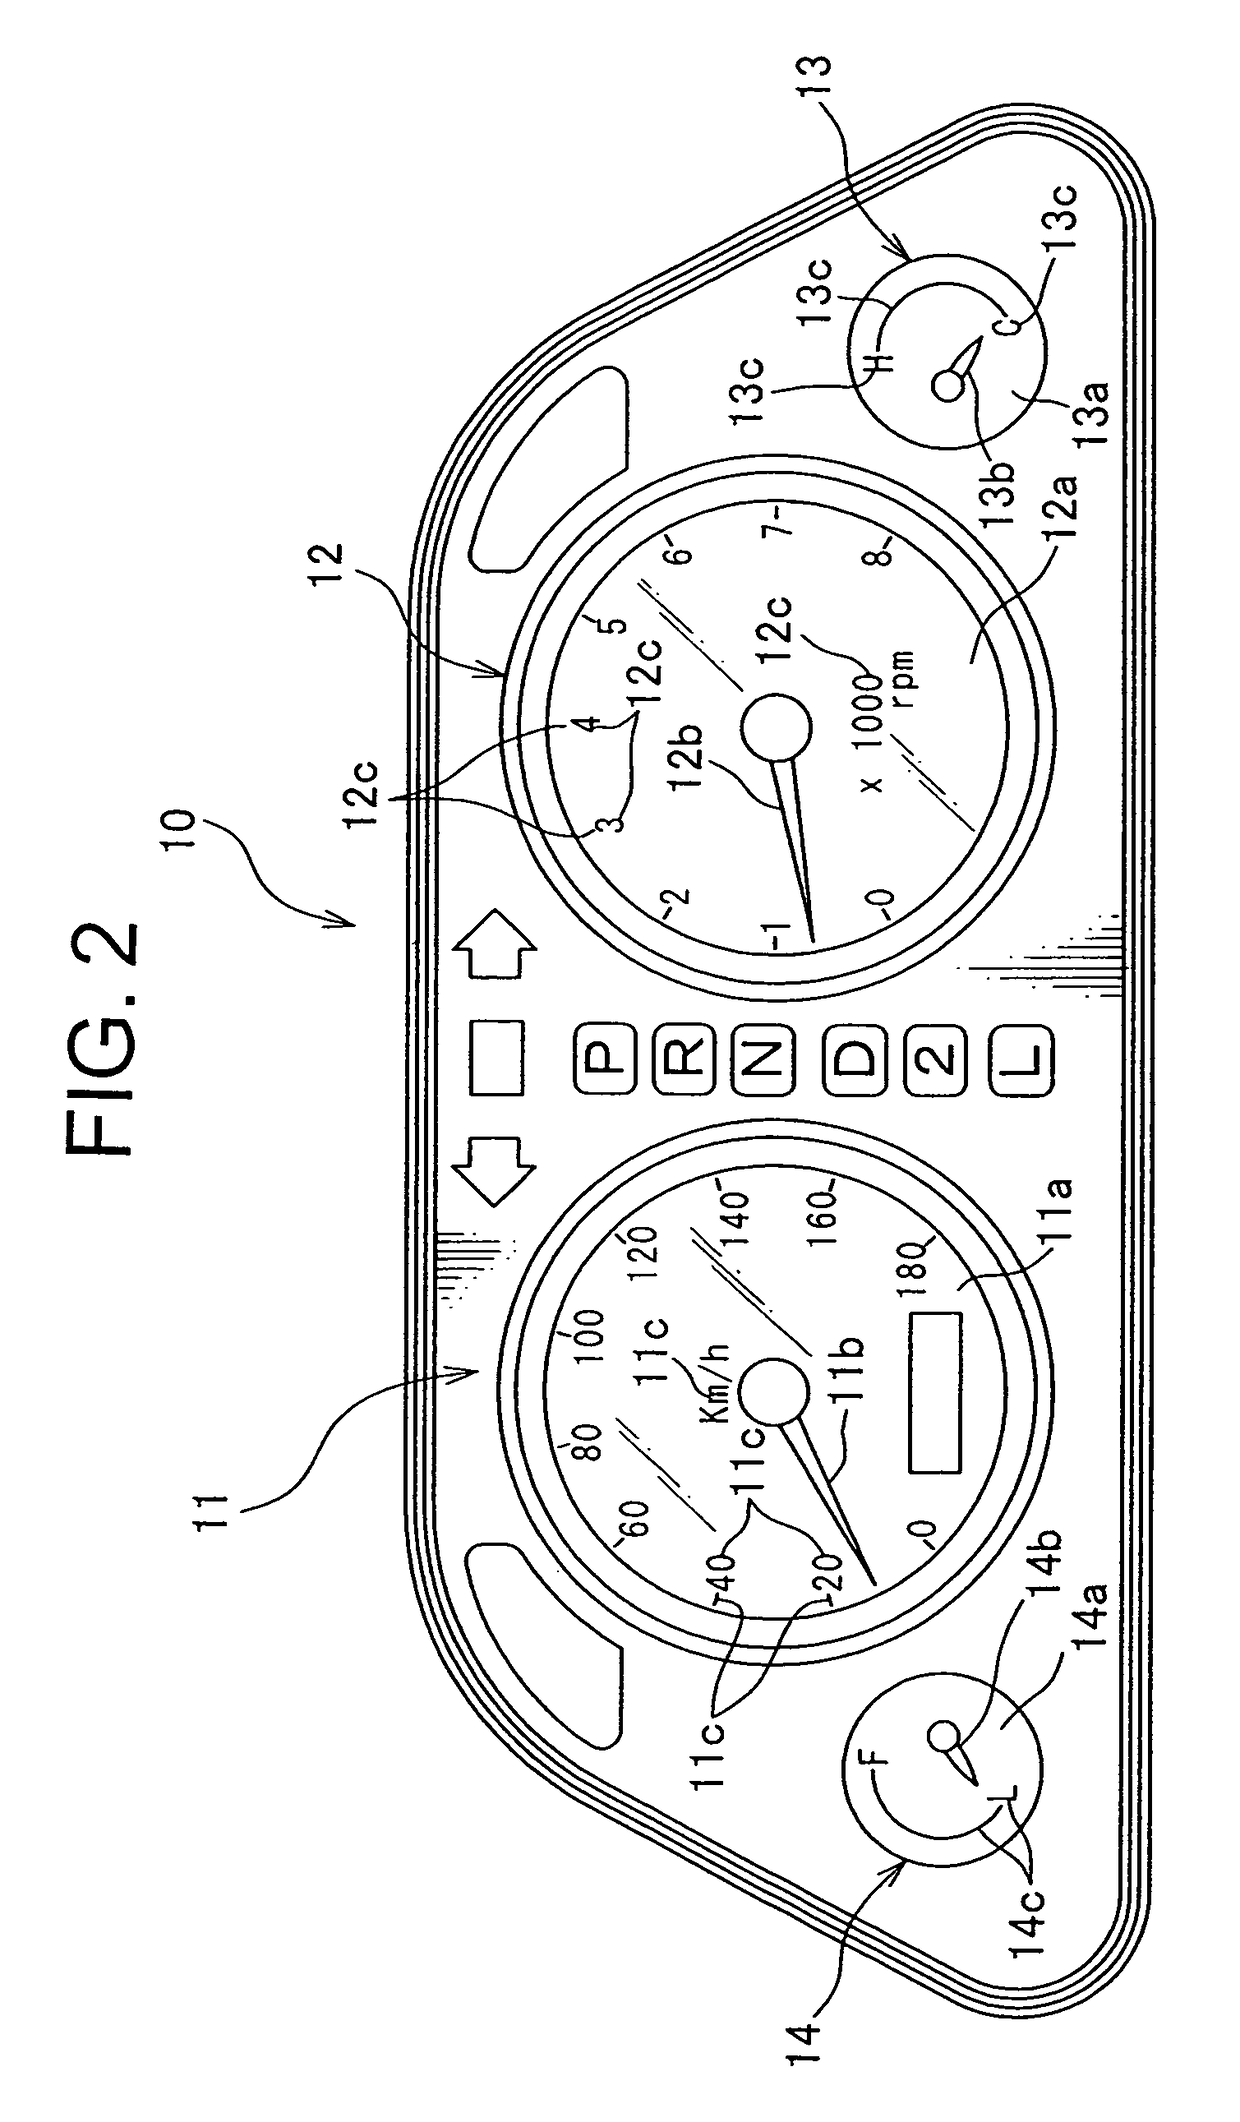 Light emission structure for indication symbol in interior space of vehicle